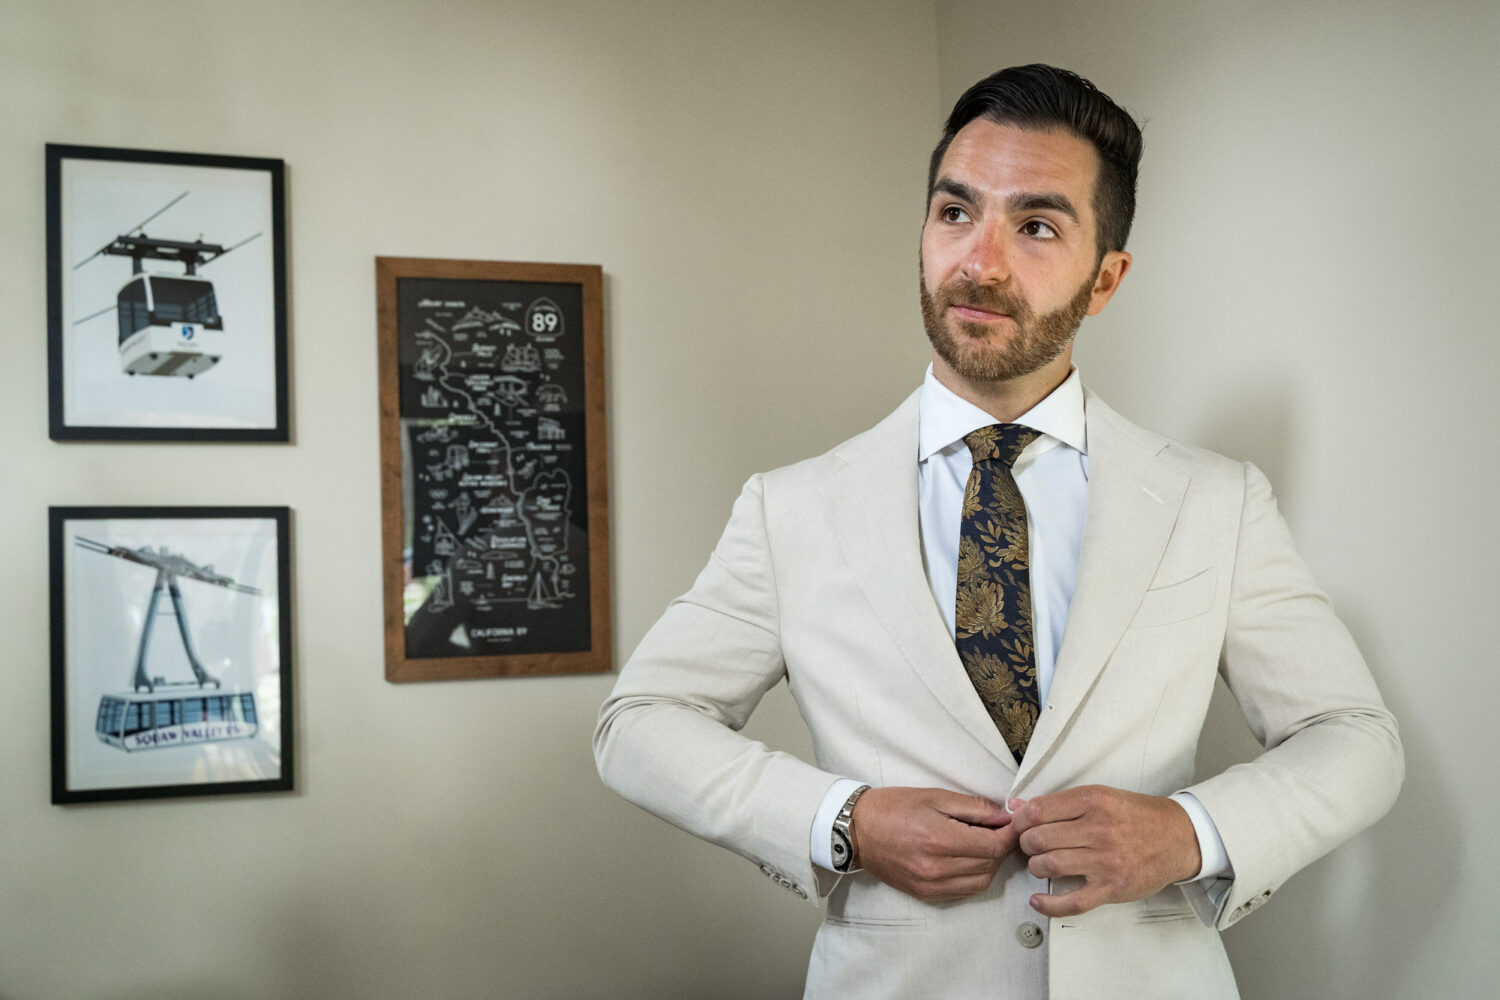 The groom buttons up his off-white wedding suit with a navy tie featuring a golden leaf design.